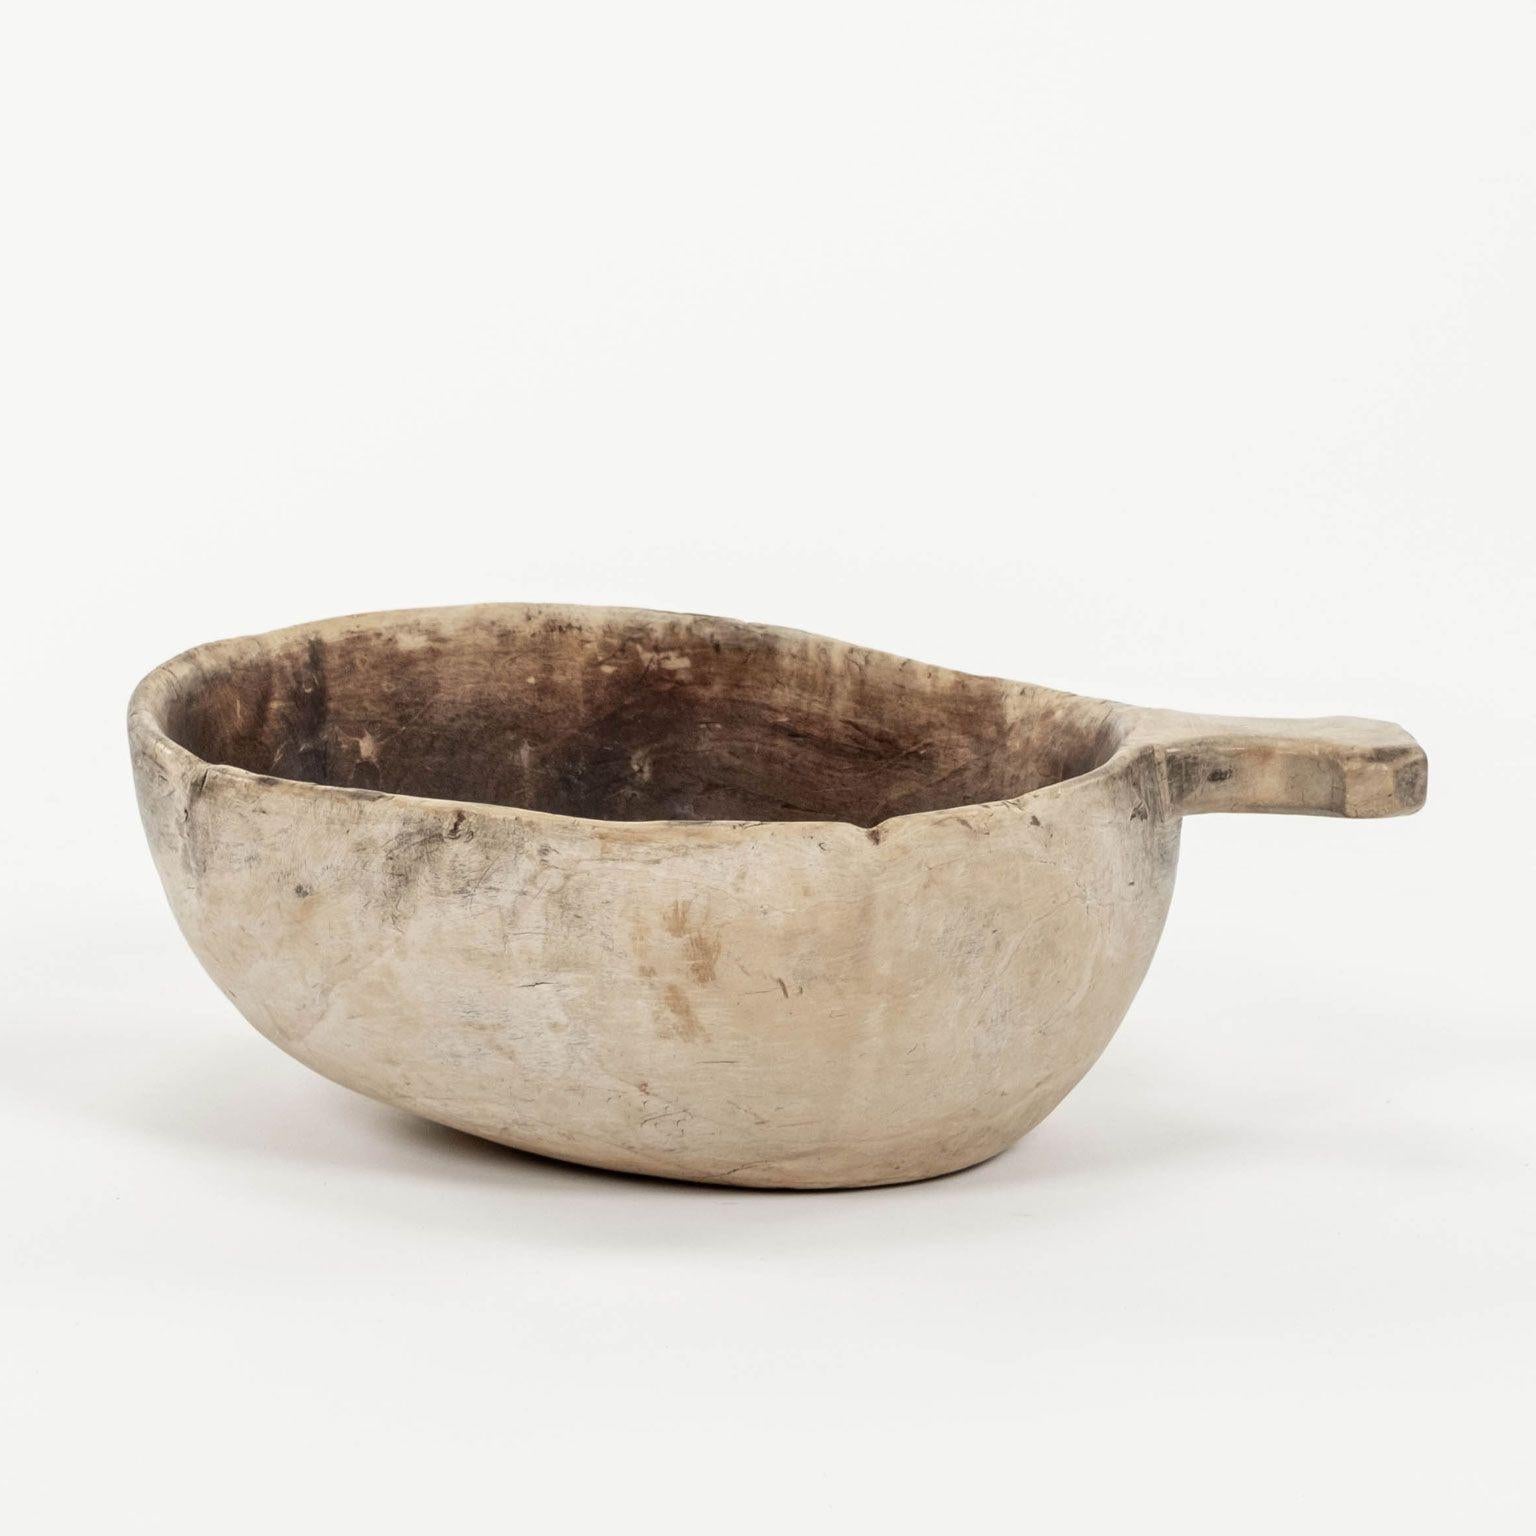 Large Bleached Swedish Lapland ale bowl with handle. Hand-carved from sycamore. Old steel plug repair with scrubbed dark interior patina.

Note: Original/early finish on antique and vintage metal will include some, or all, of the following: patina,